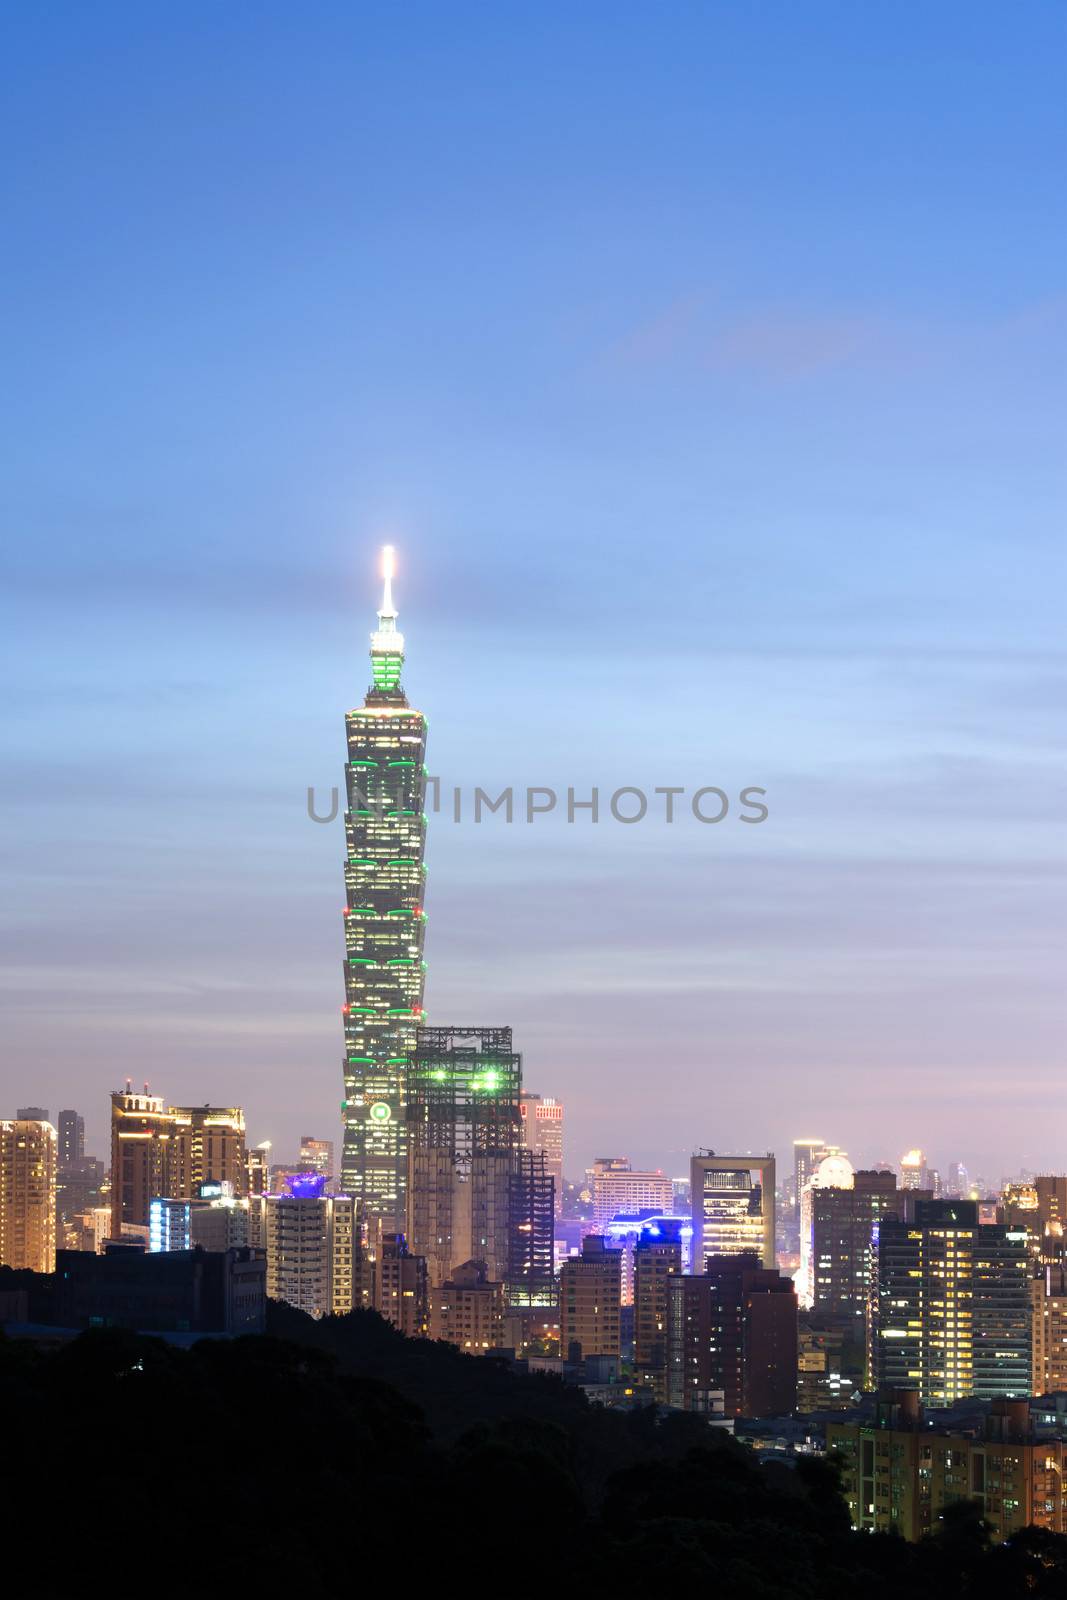 Taipei city night with famous landmark, 101 skyscraper, under blue and dramatic colorful sky in Taiwan, Asia.